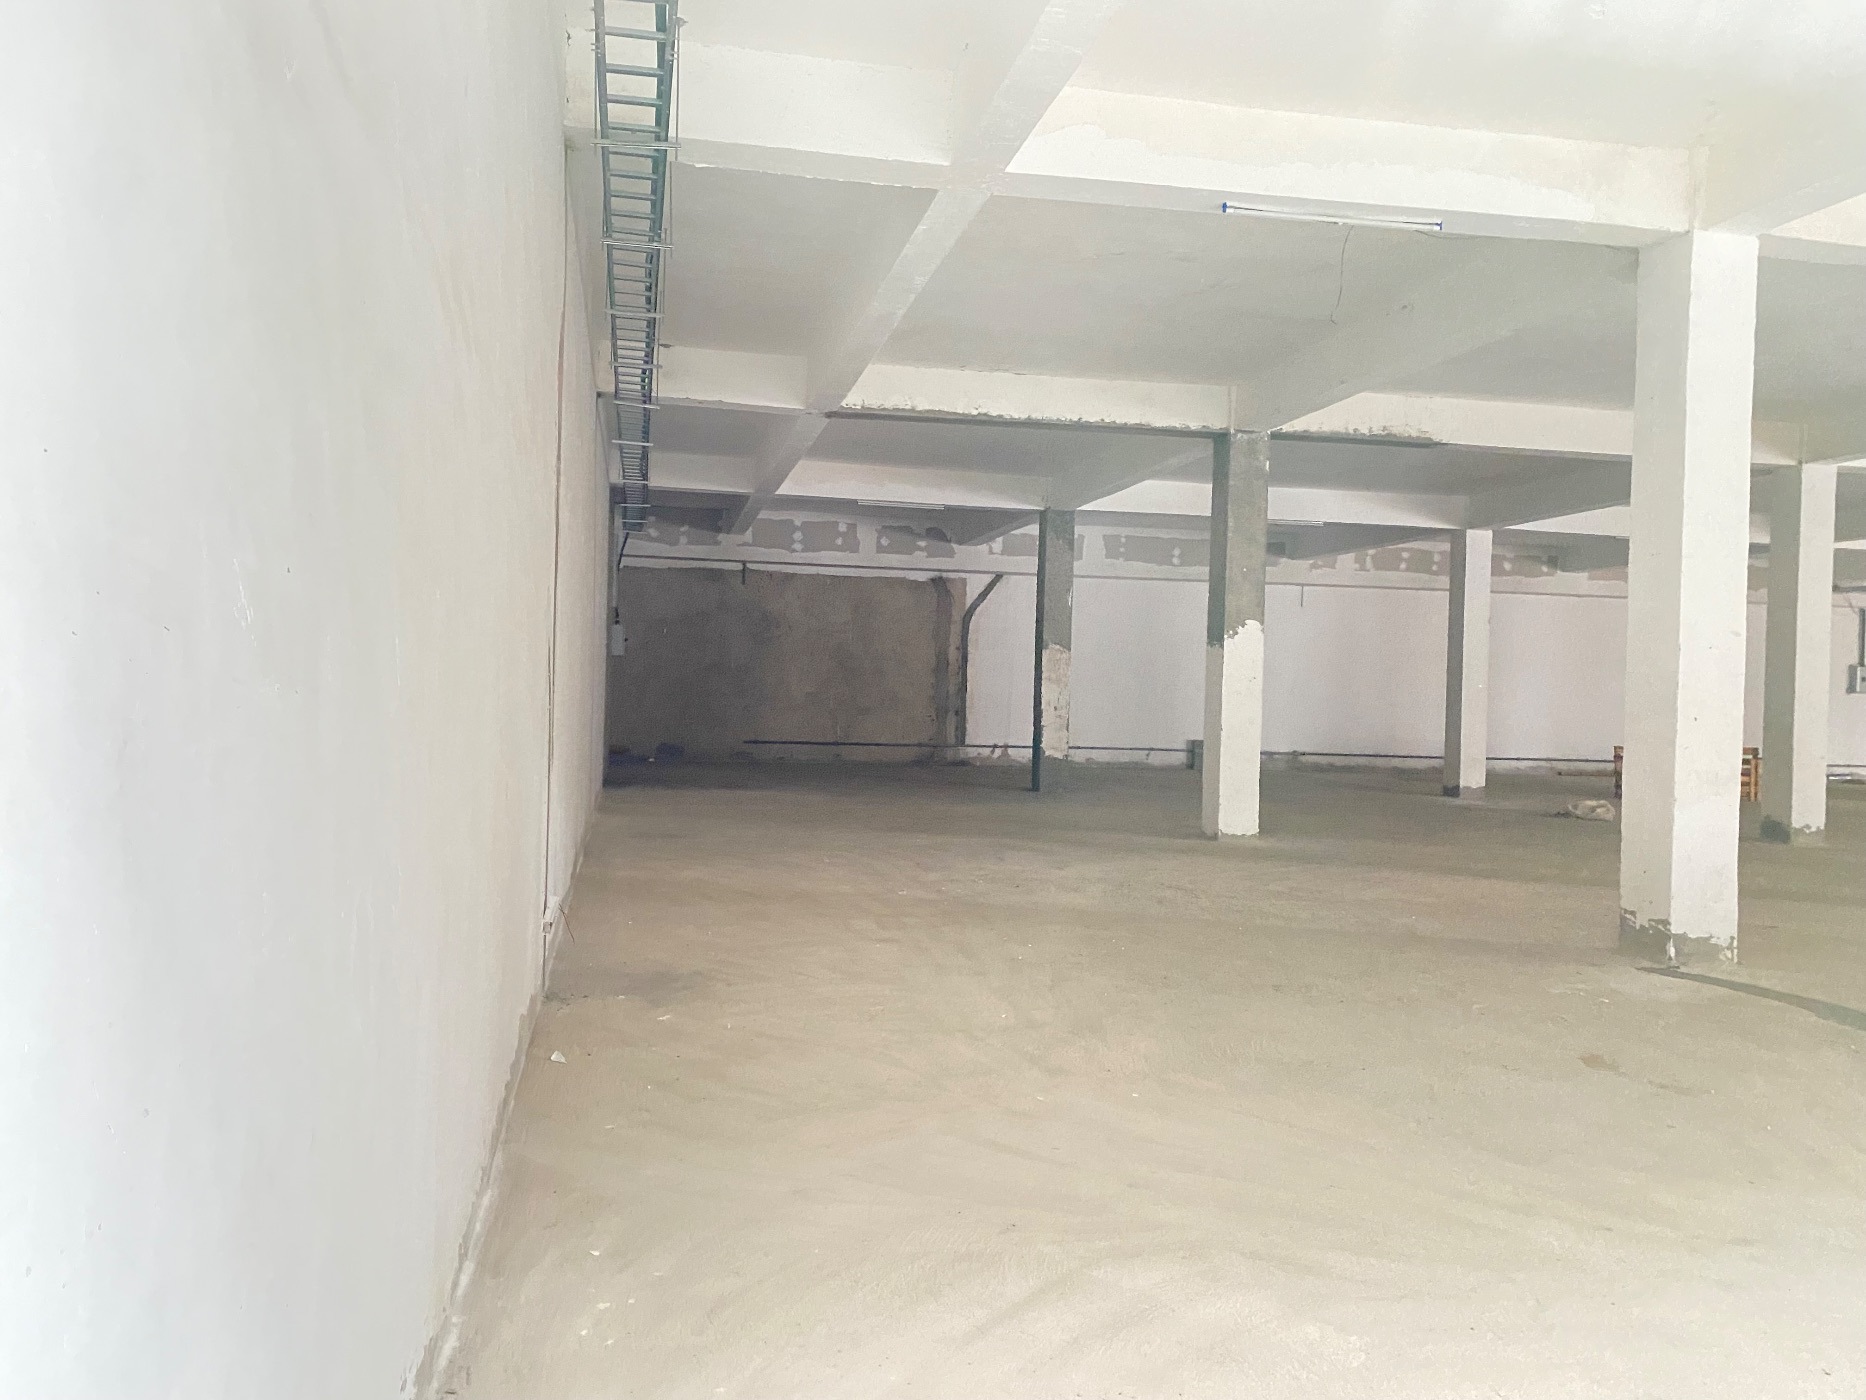 279 m&sup2; commercial retail property to rent in Kilimani (Kenya)